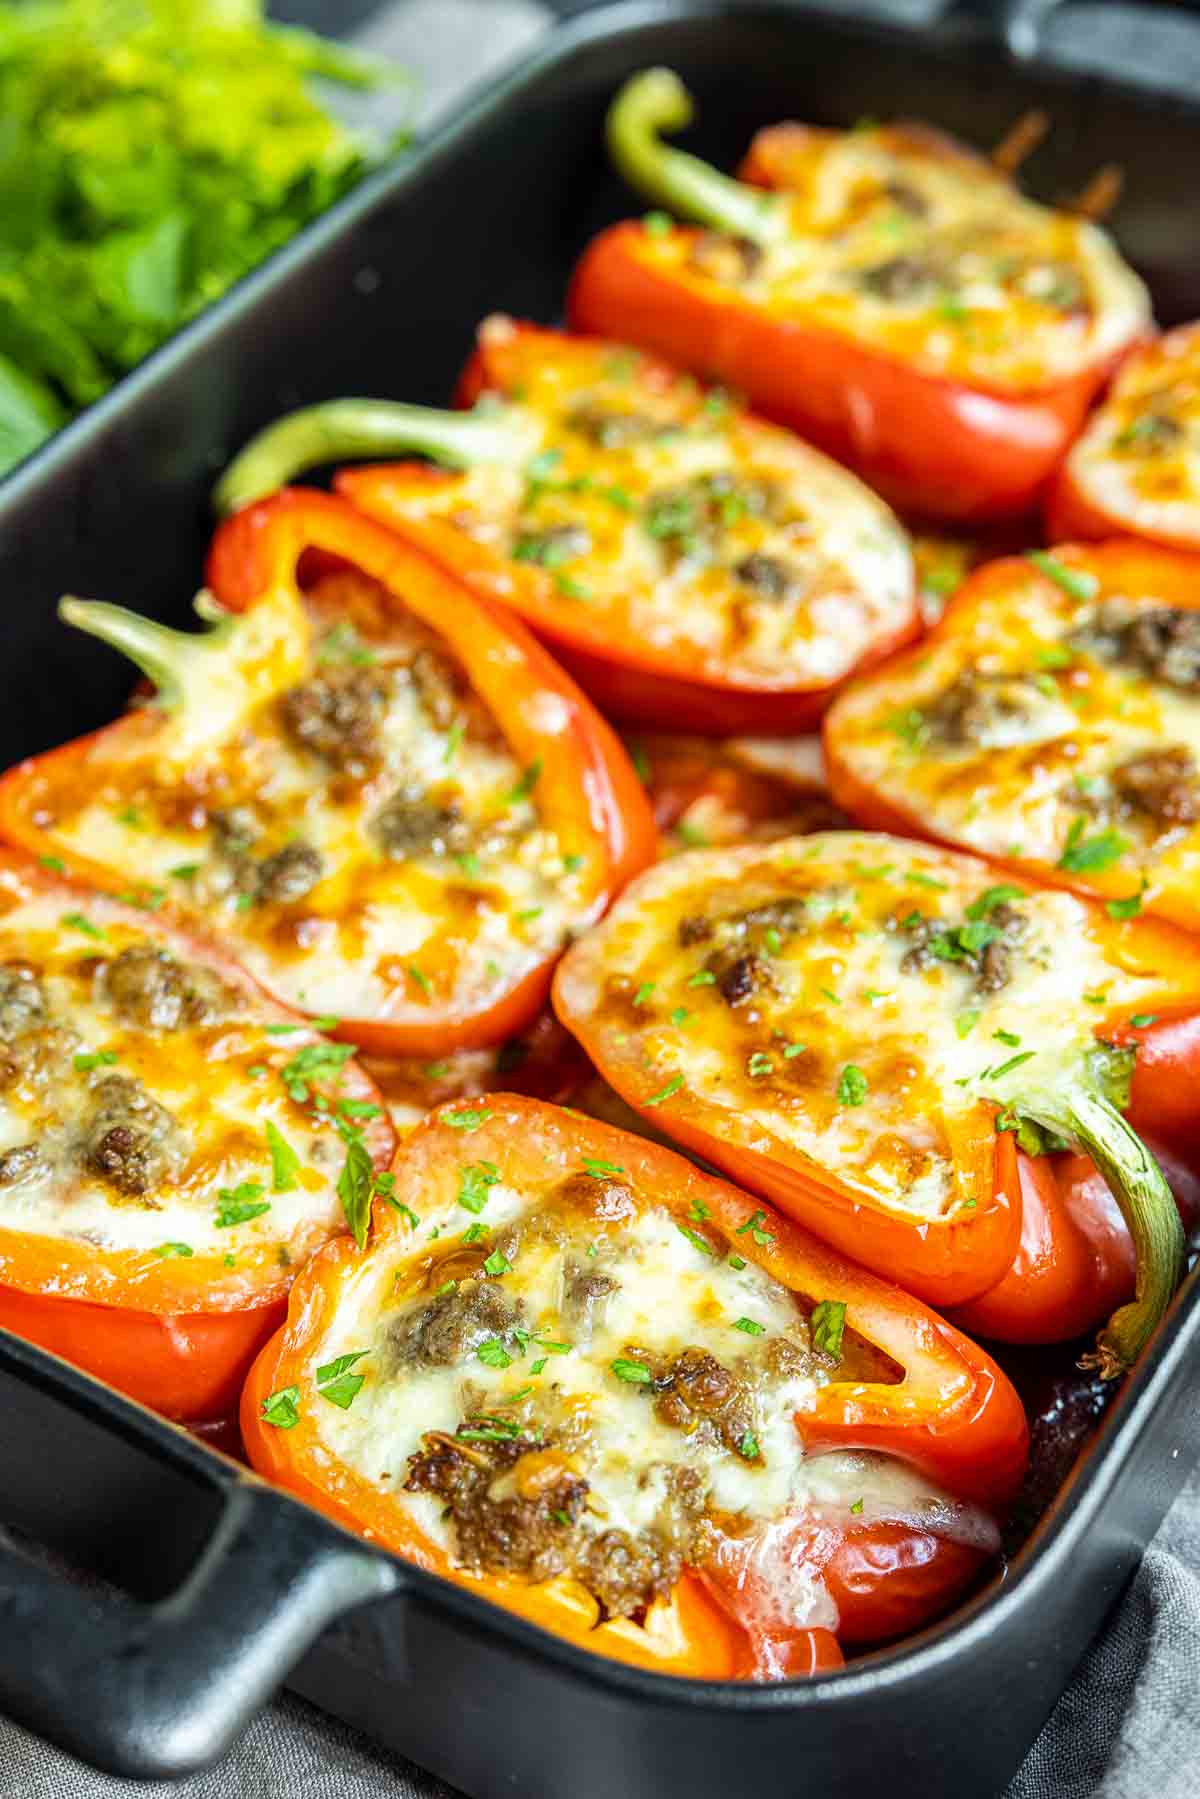 Lasagna Stuffed Peppers stuffed with beef and cheese